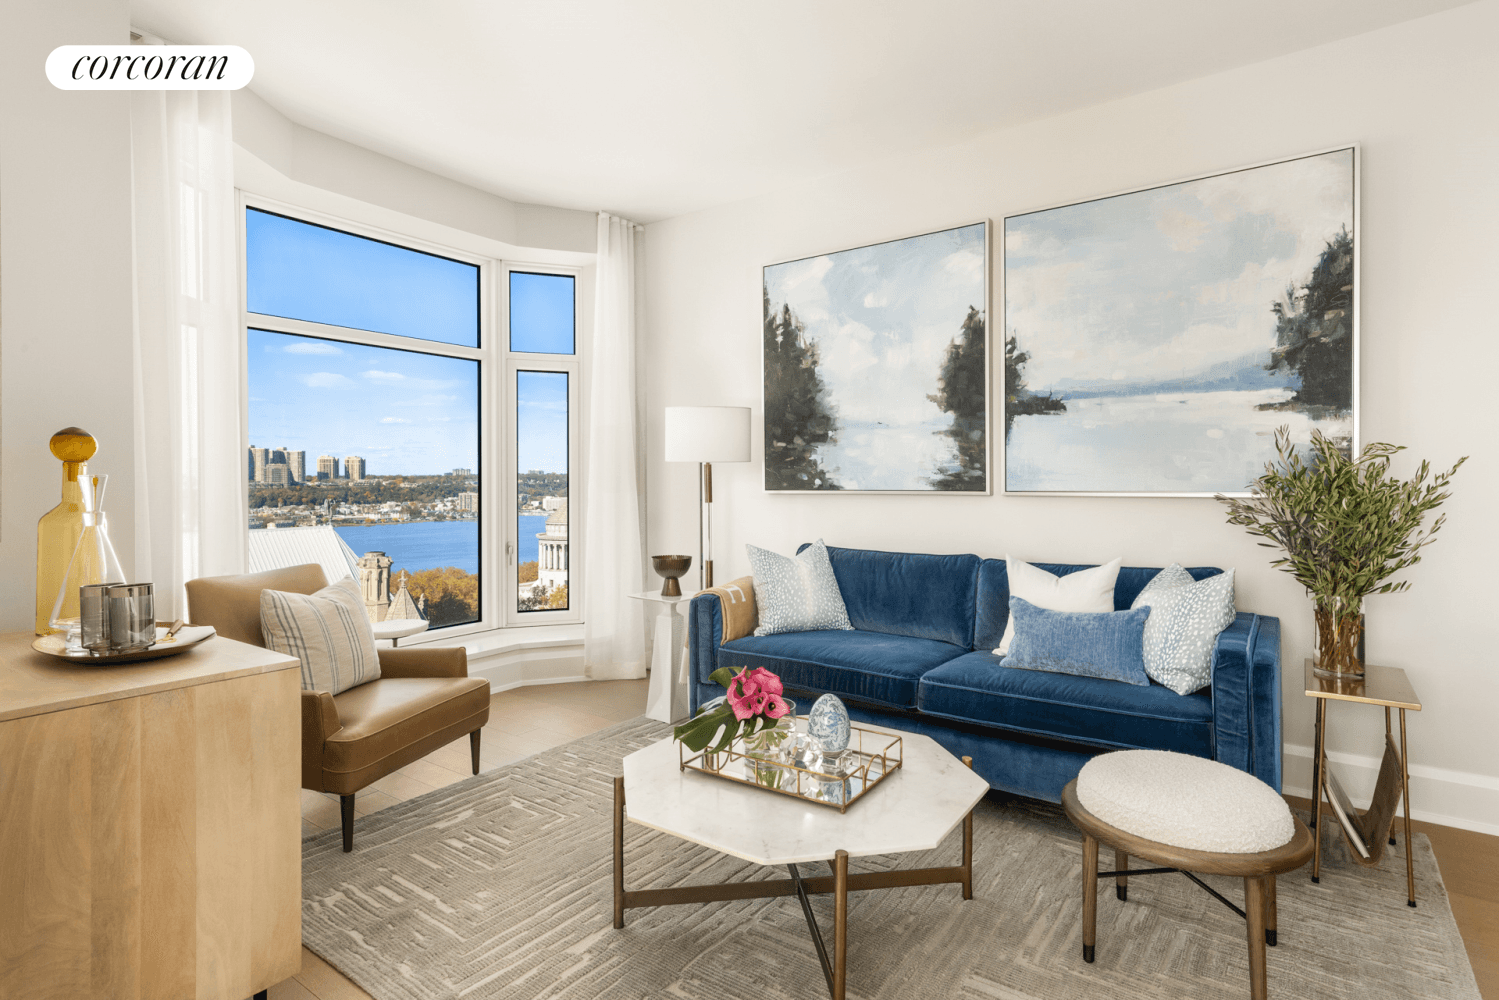 Boasting unobstructed eastern views and expansive windows, Residence 15D is a 706 square foot one bedroom home that receives plentiful light and air.